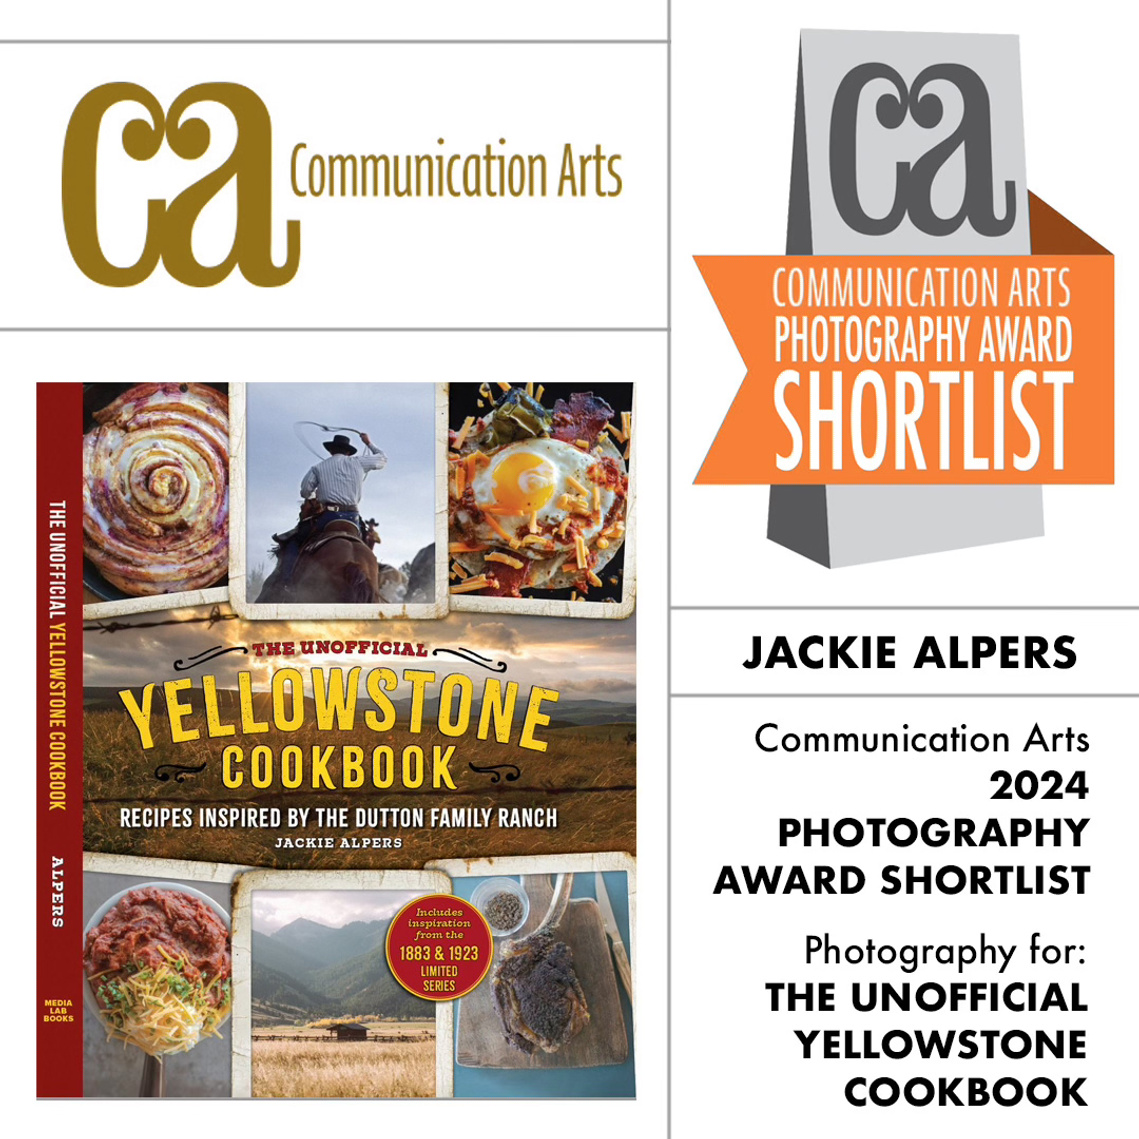 The Unofficial Yellowstone Cookbook by Jackie Alpers is on the Communication Arts Photography Award Shortlist, 2024